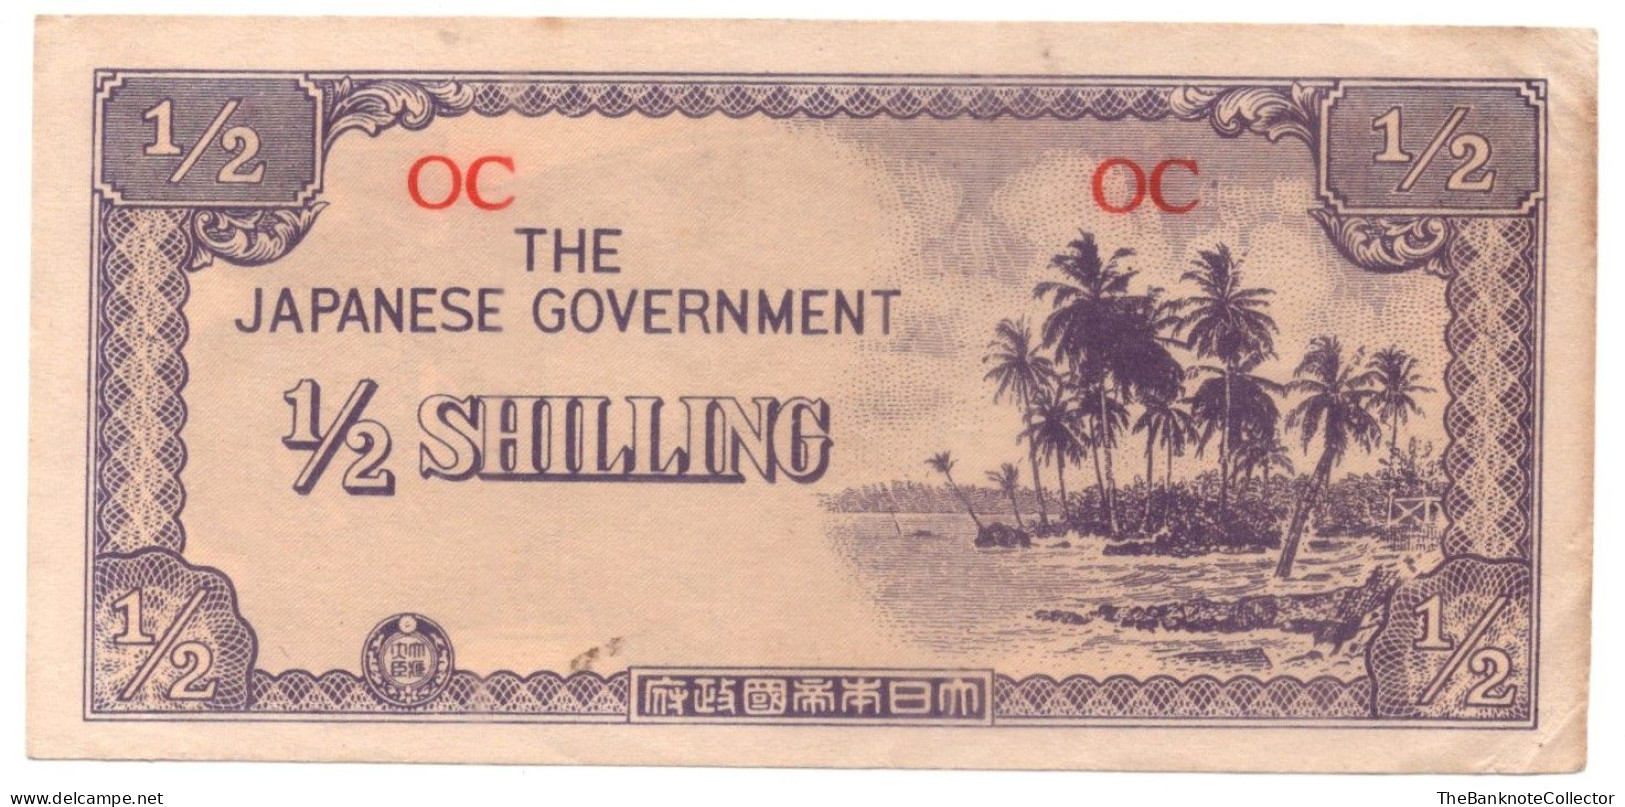 Japan Government Occupation JIM Oceania 1/2 Shilling WWII ND 1942 P-1 EF - Japón